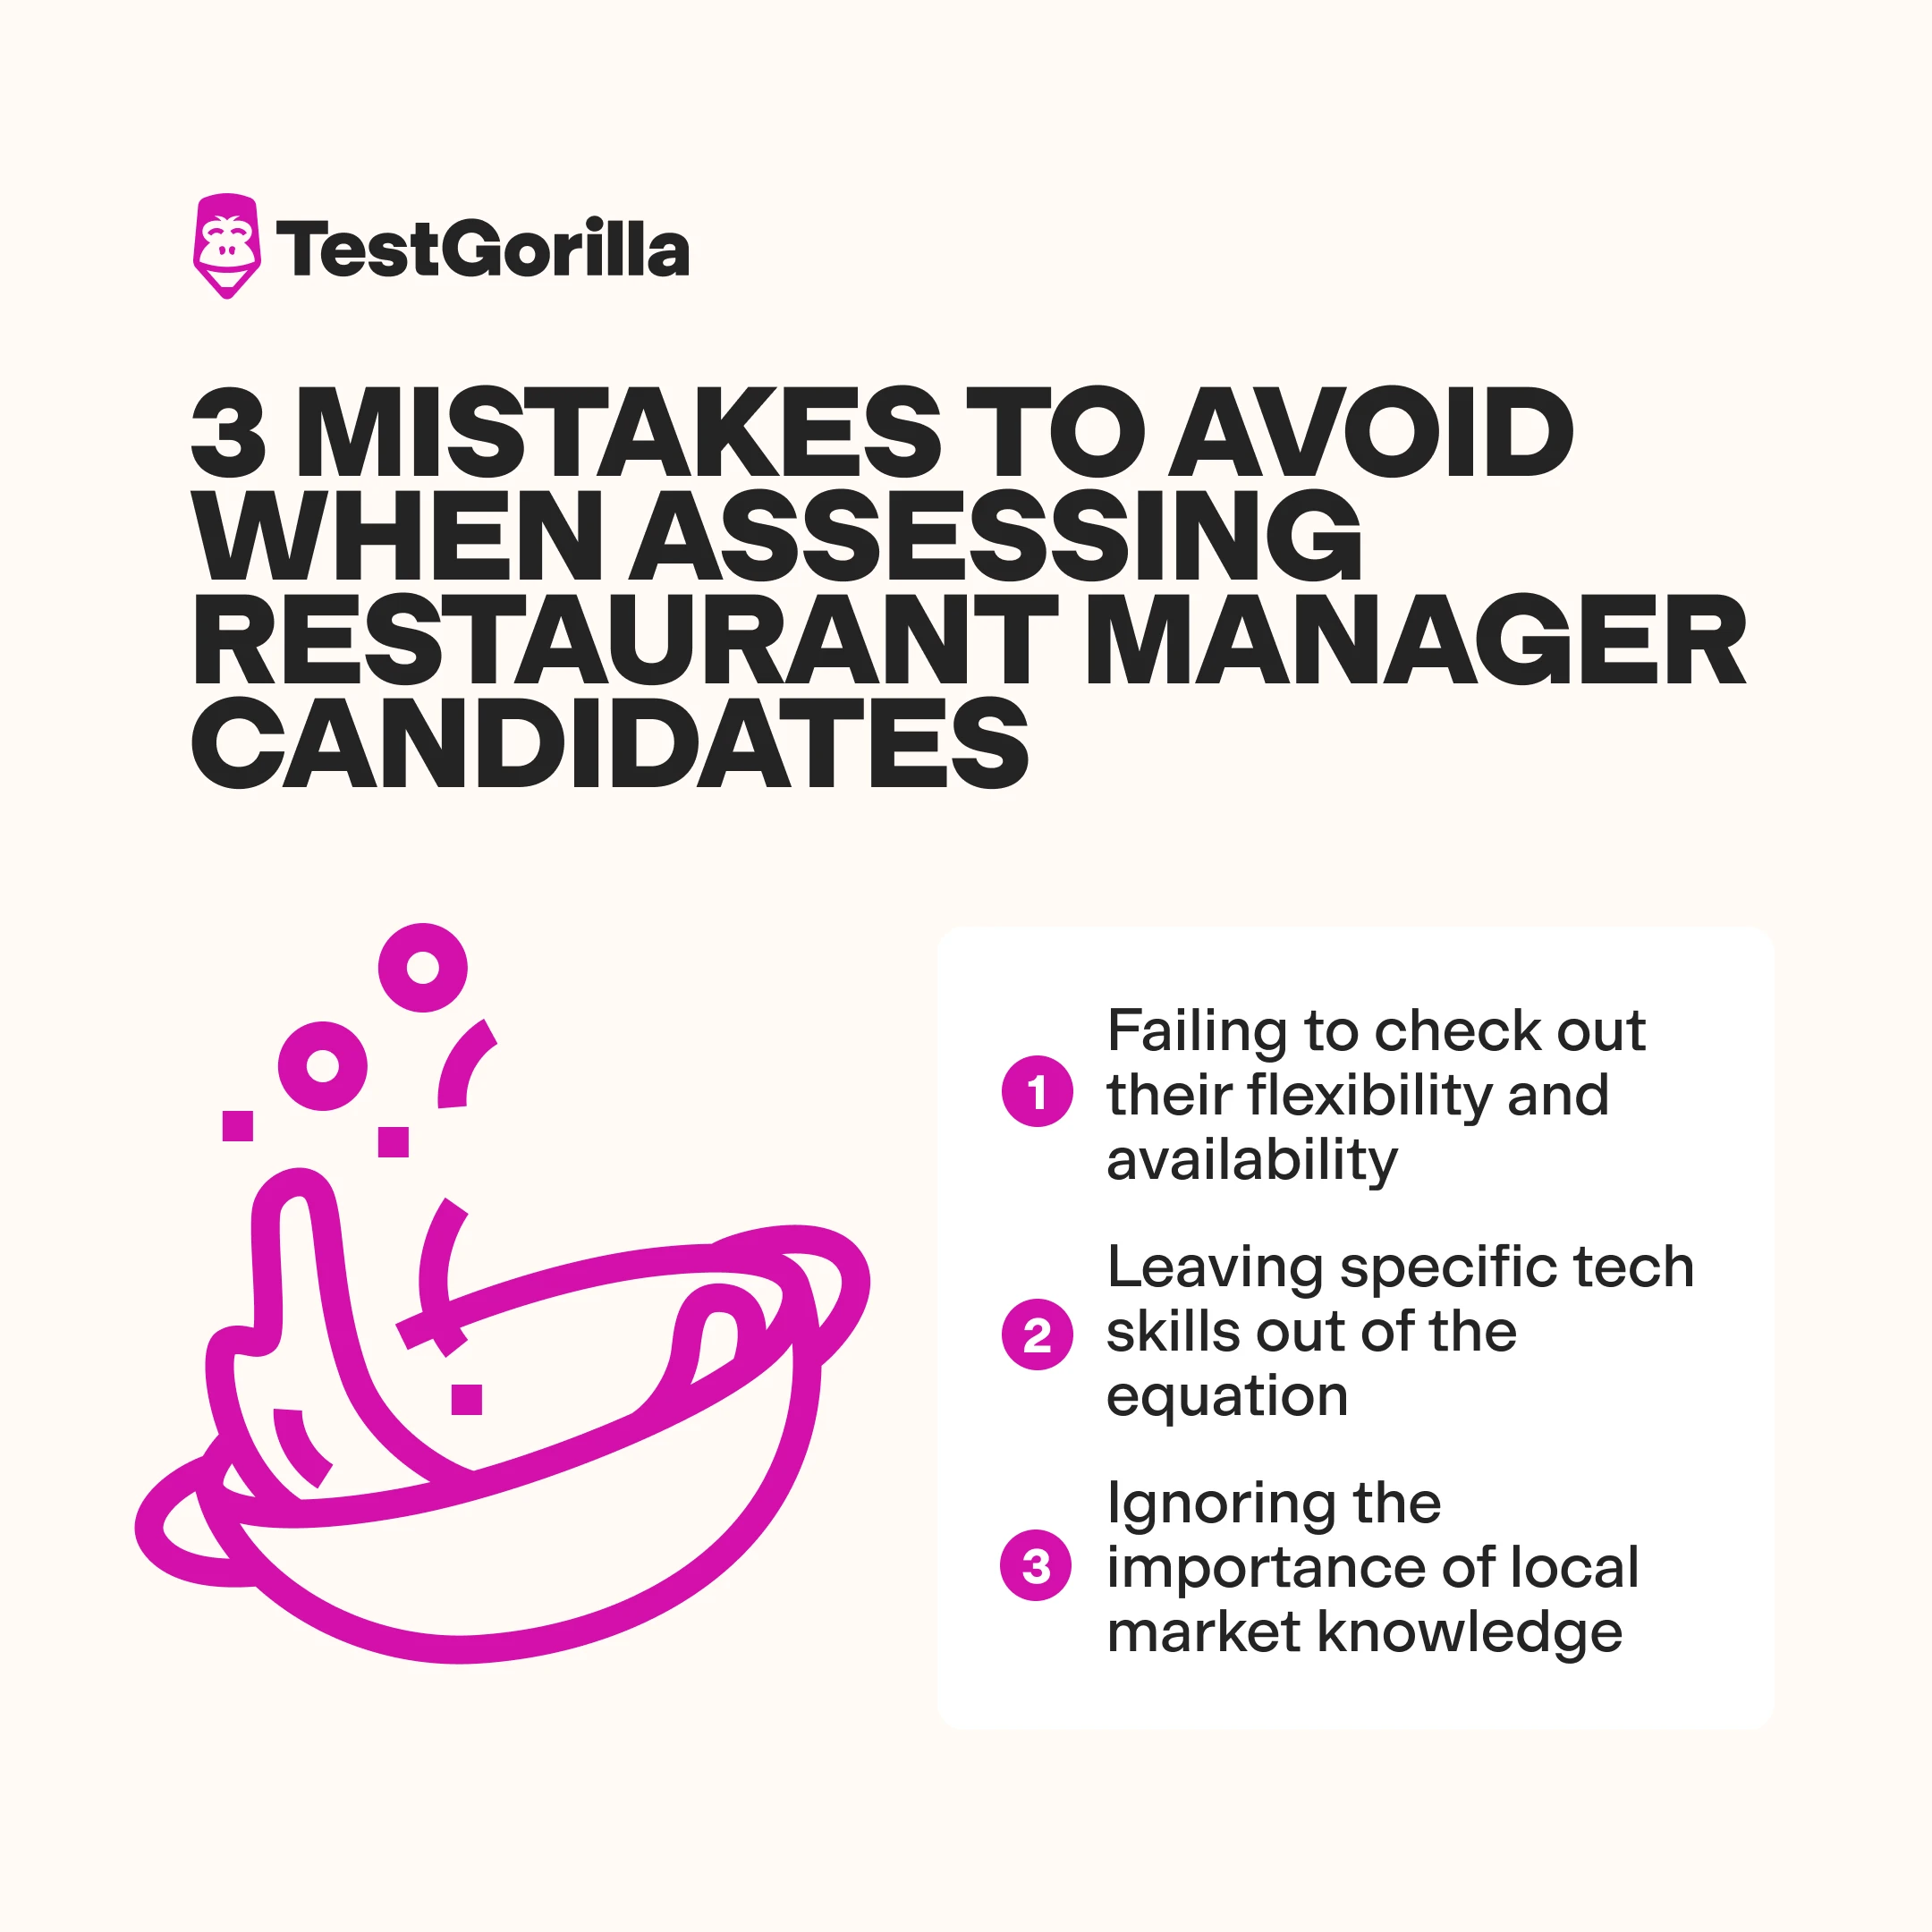 3 mistakes to avoid when assessing restaurant manager candidates graphic